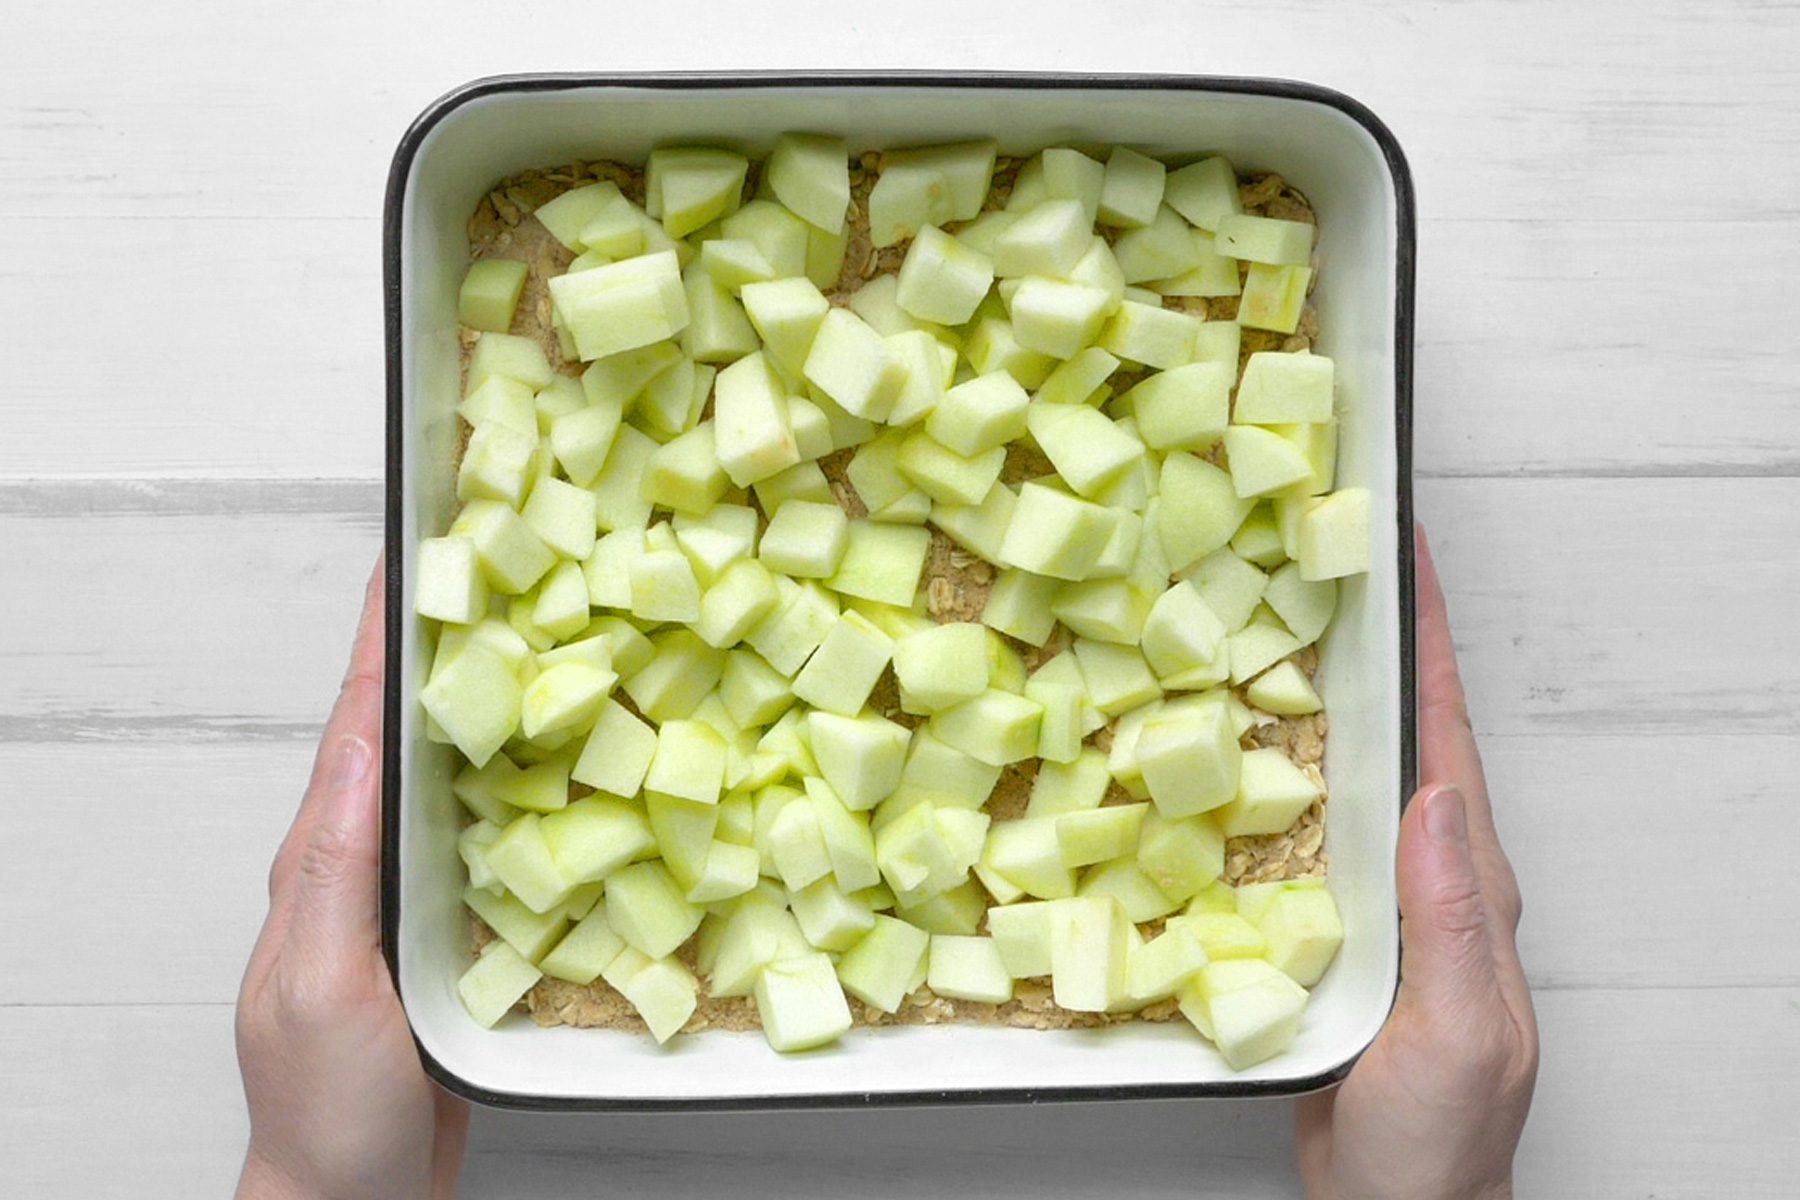 A square baking dish filled with chopped apples.